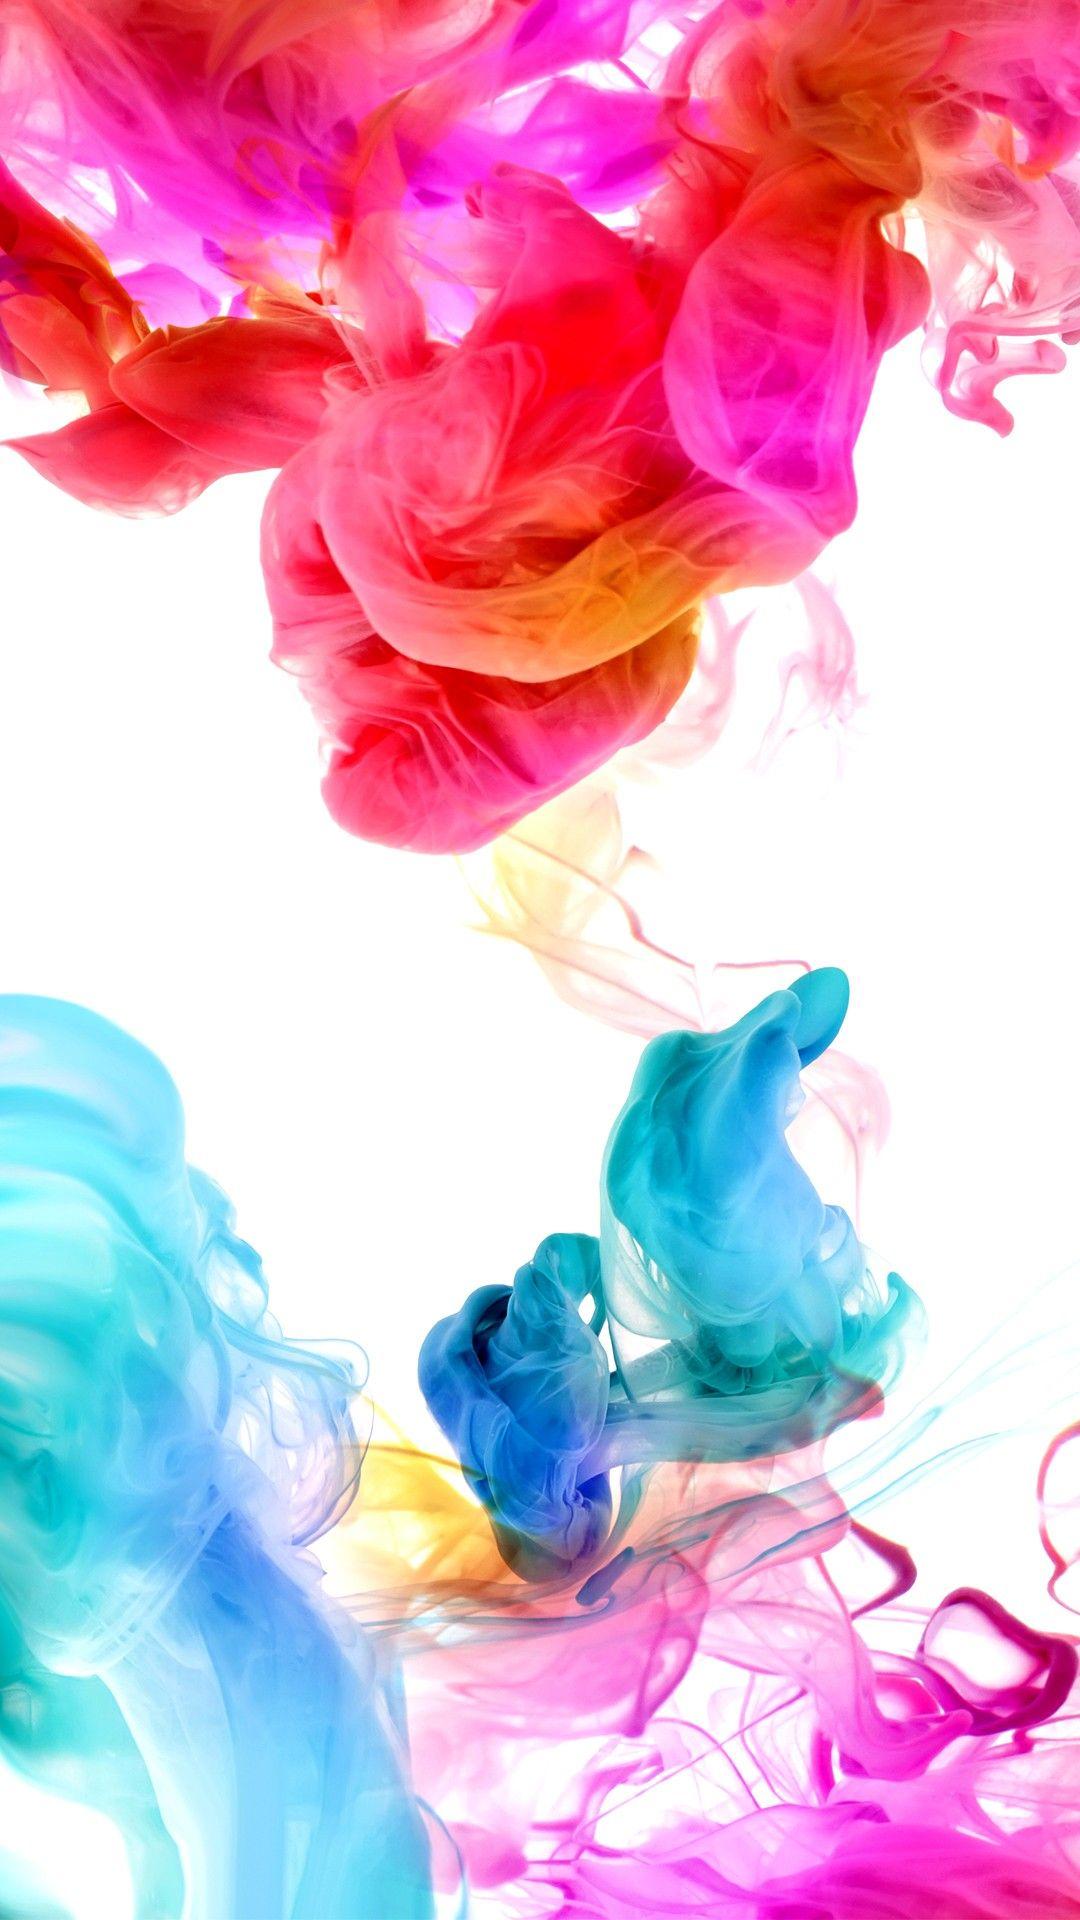 Color Smoke IPhone Wallpaper  IPhone Wallpapers  iPhone Wallpapers